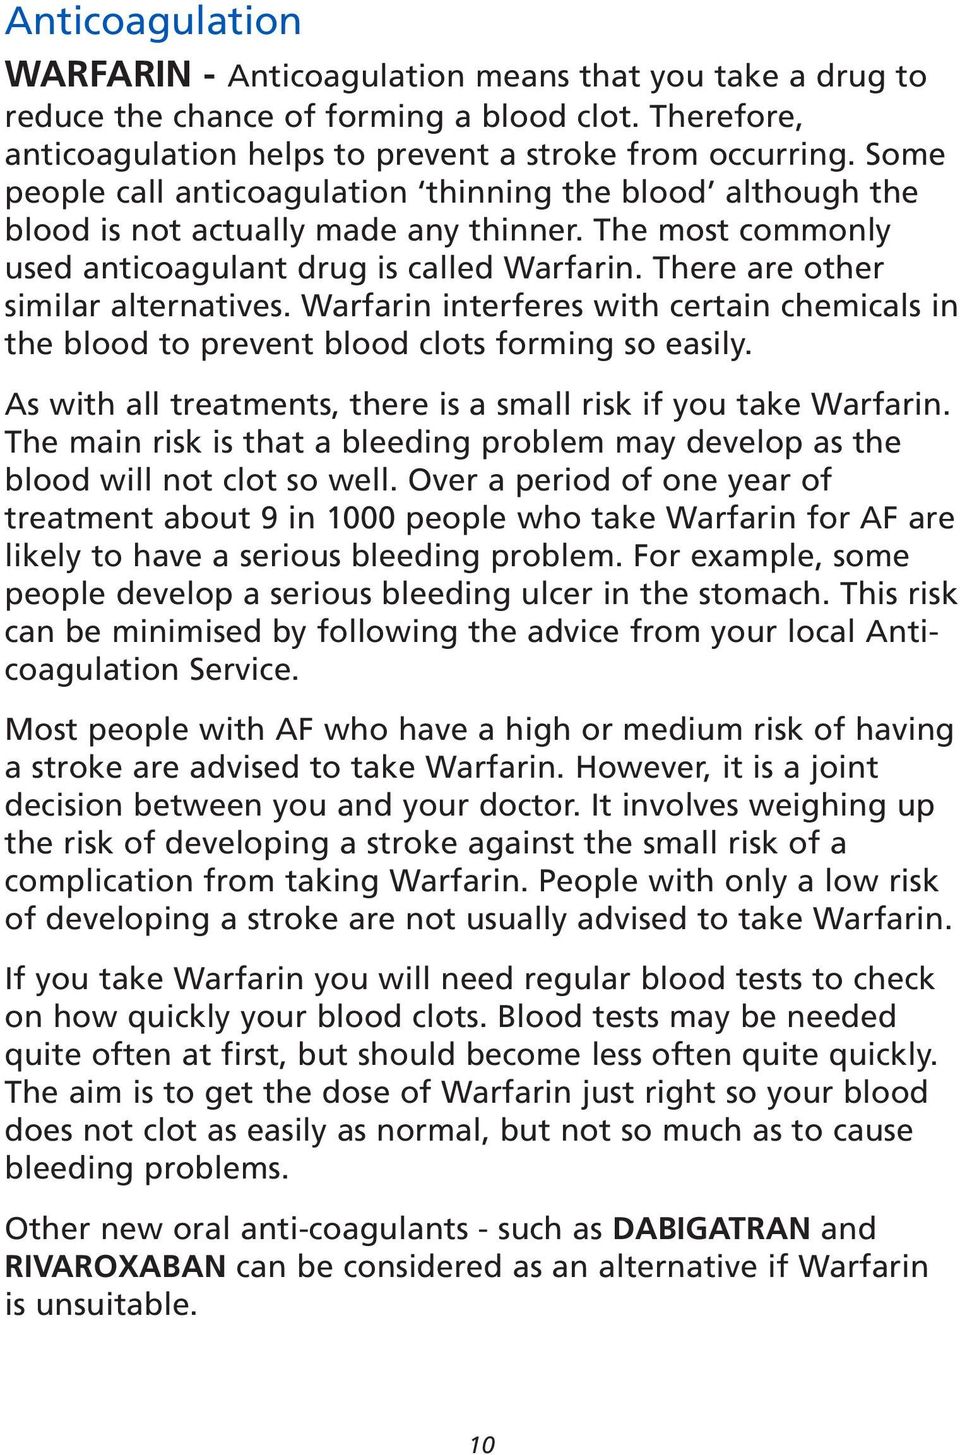 There are other similar alternatives. Warfarin interferes with certain chemicals in the blood to prevent blood clots forming so easily.